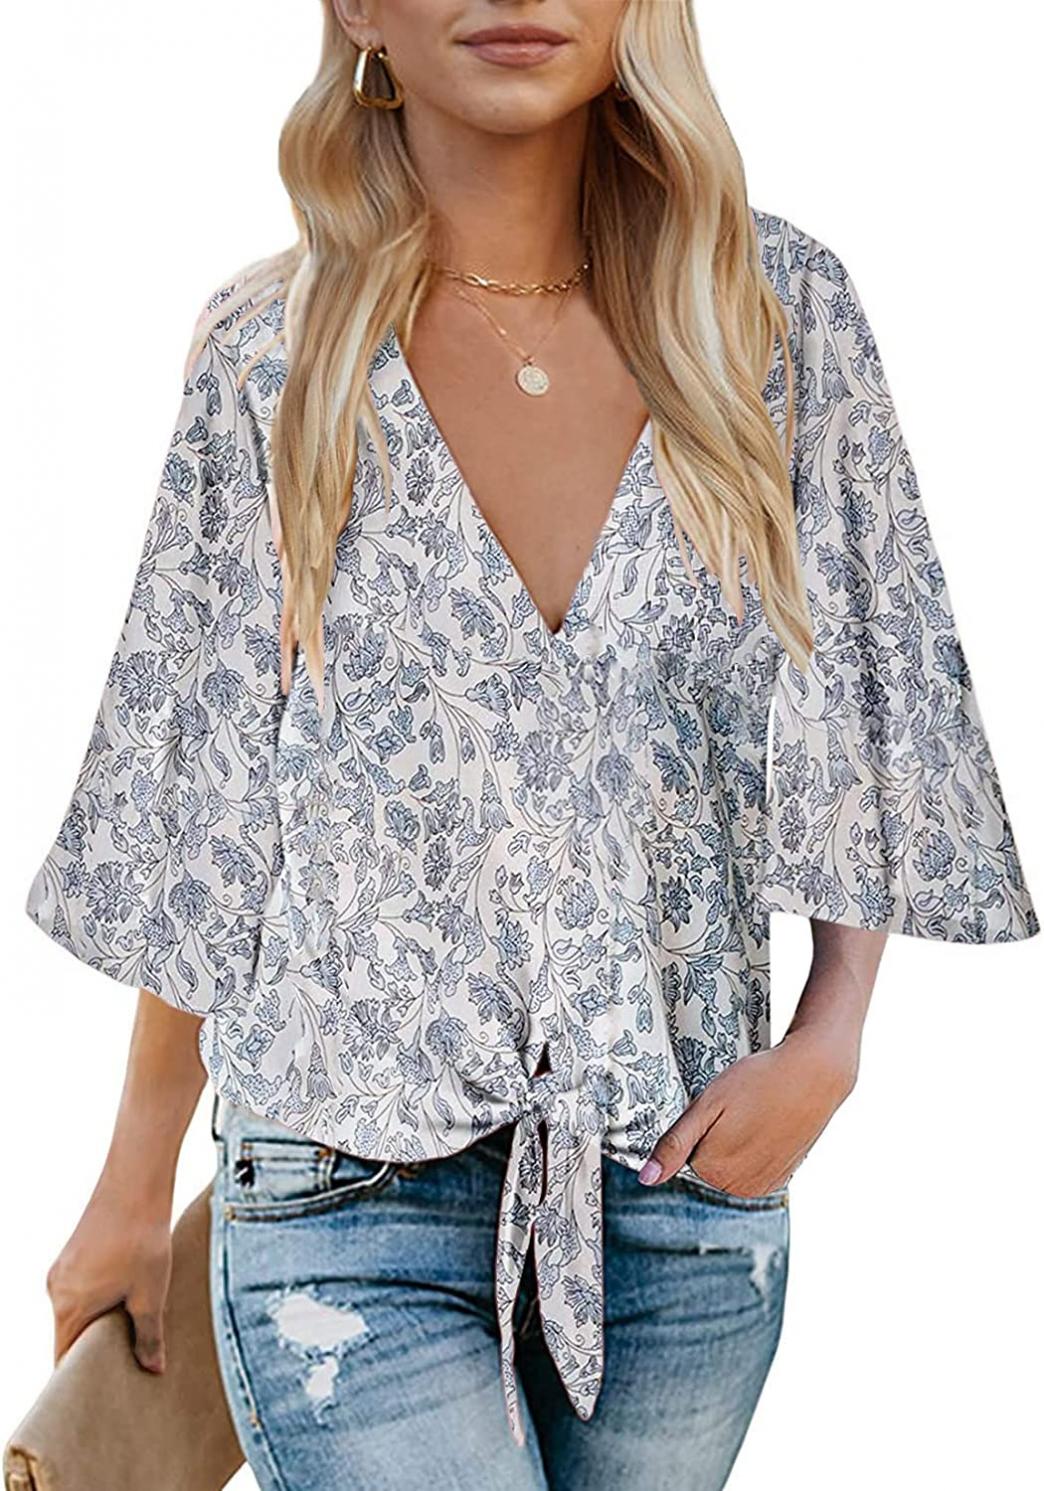 Bluetime Womens Summer Tops Boho 3/4 Sleeve V Neck Tie Front Shirts Casual Floral Blouses